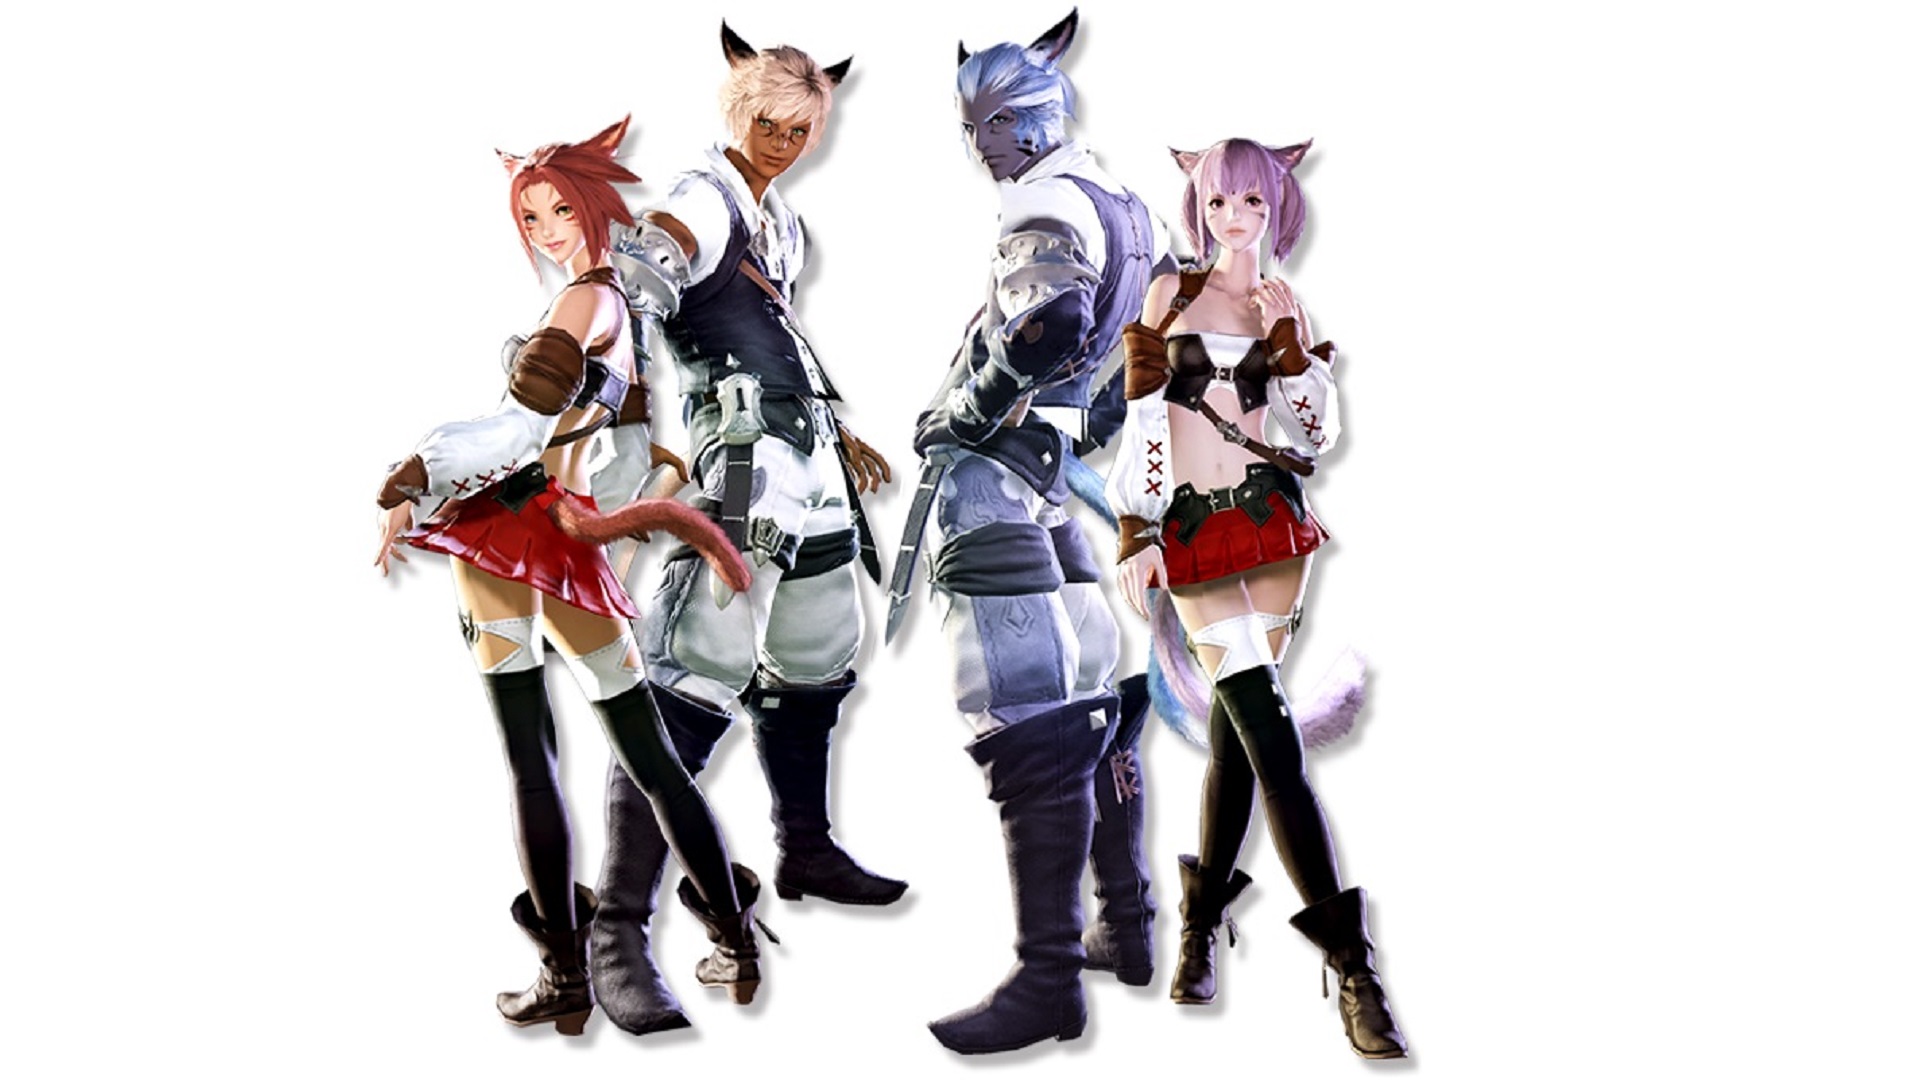 Why Does Final Fantasy Xiv Still Have Gender Locked Races In 2019